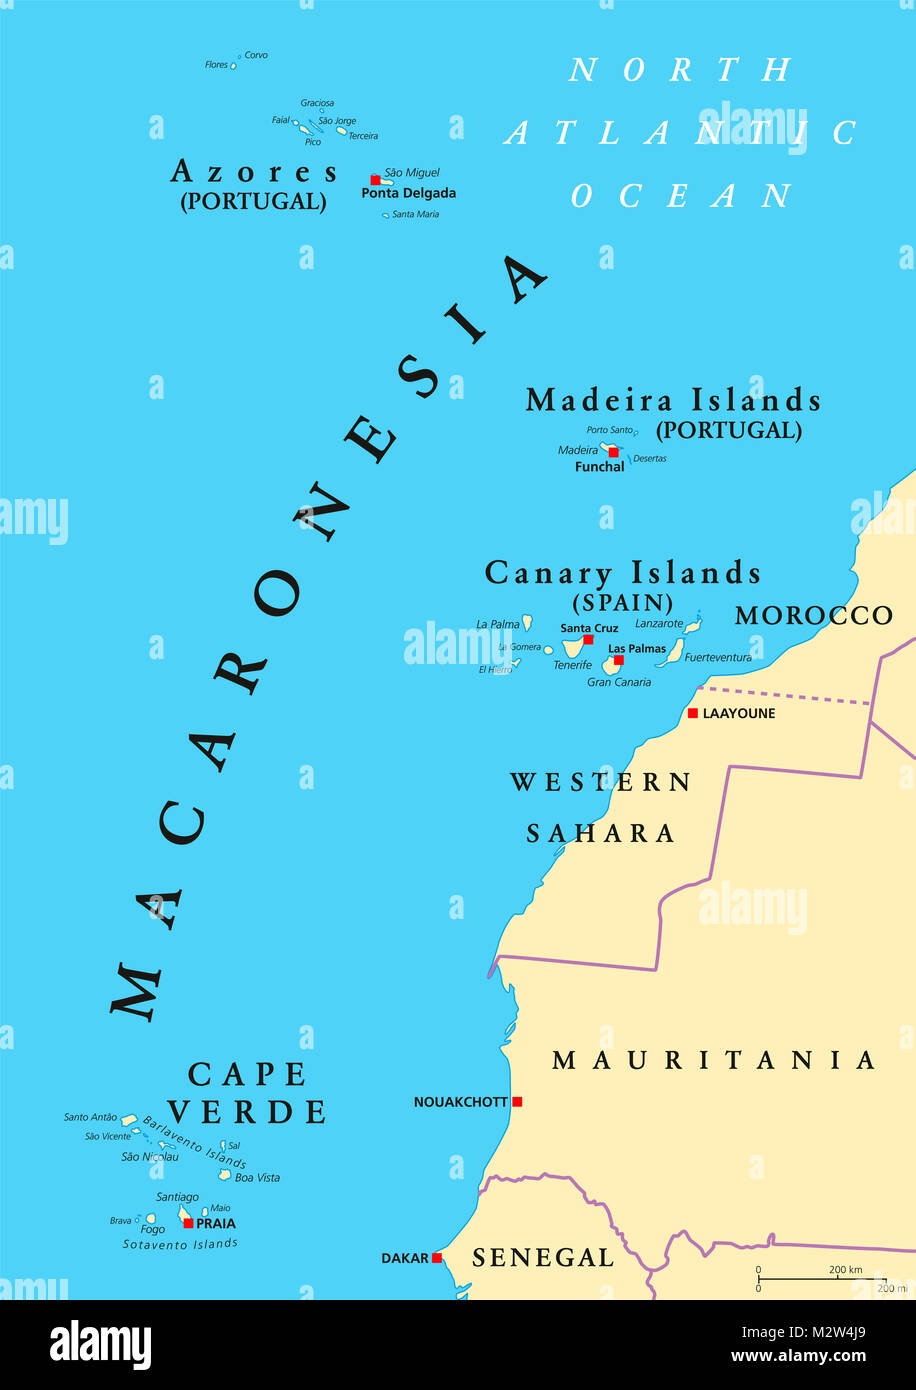 Macaronesia political map. Azores, Cape Verde, Madeira and Canary Islands. Collection of four archipelagos in the North Atlantic Ocean. Stock Photo